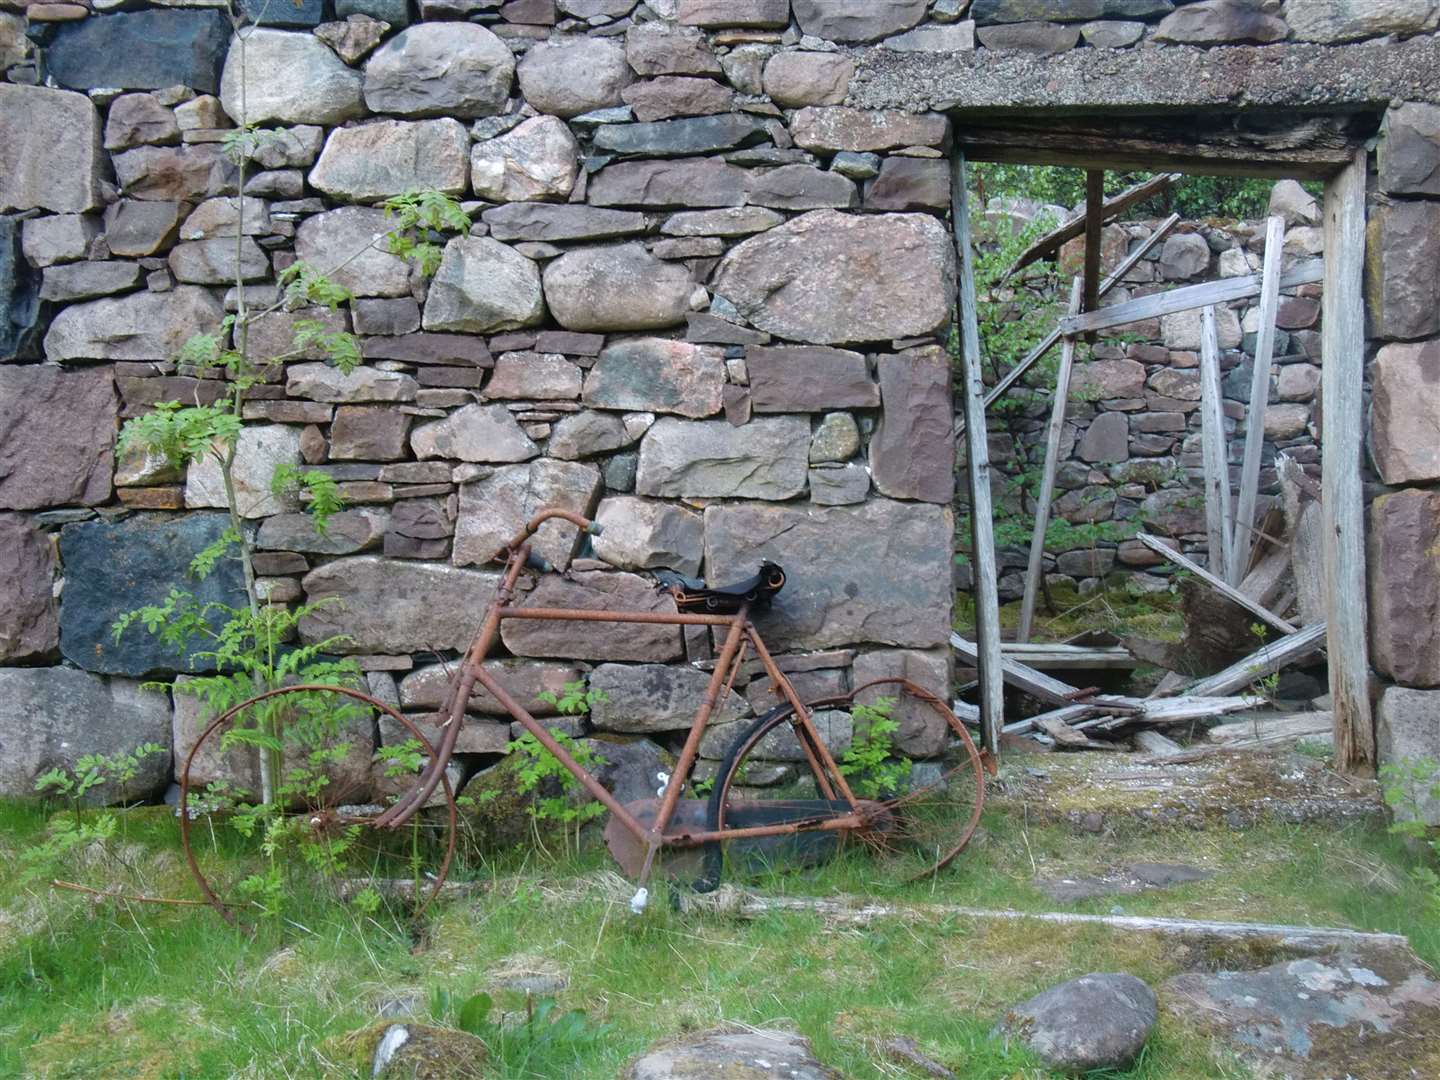 This bike, resting against a derelict building on our return, had seen better days.